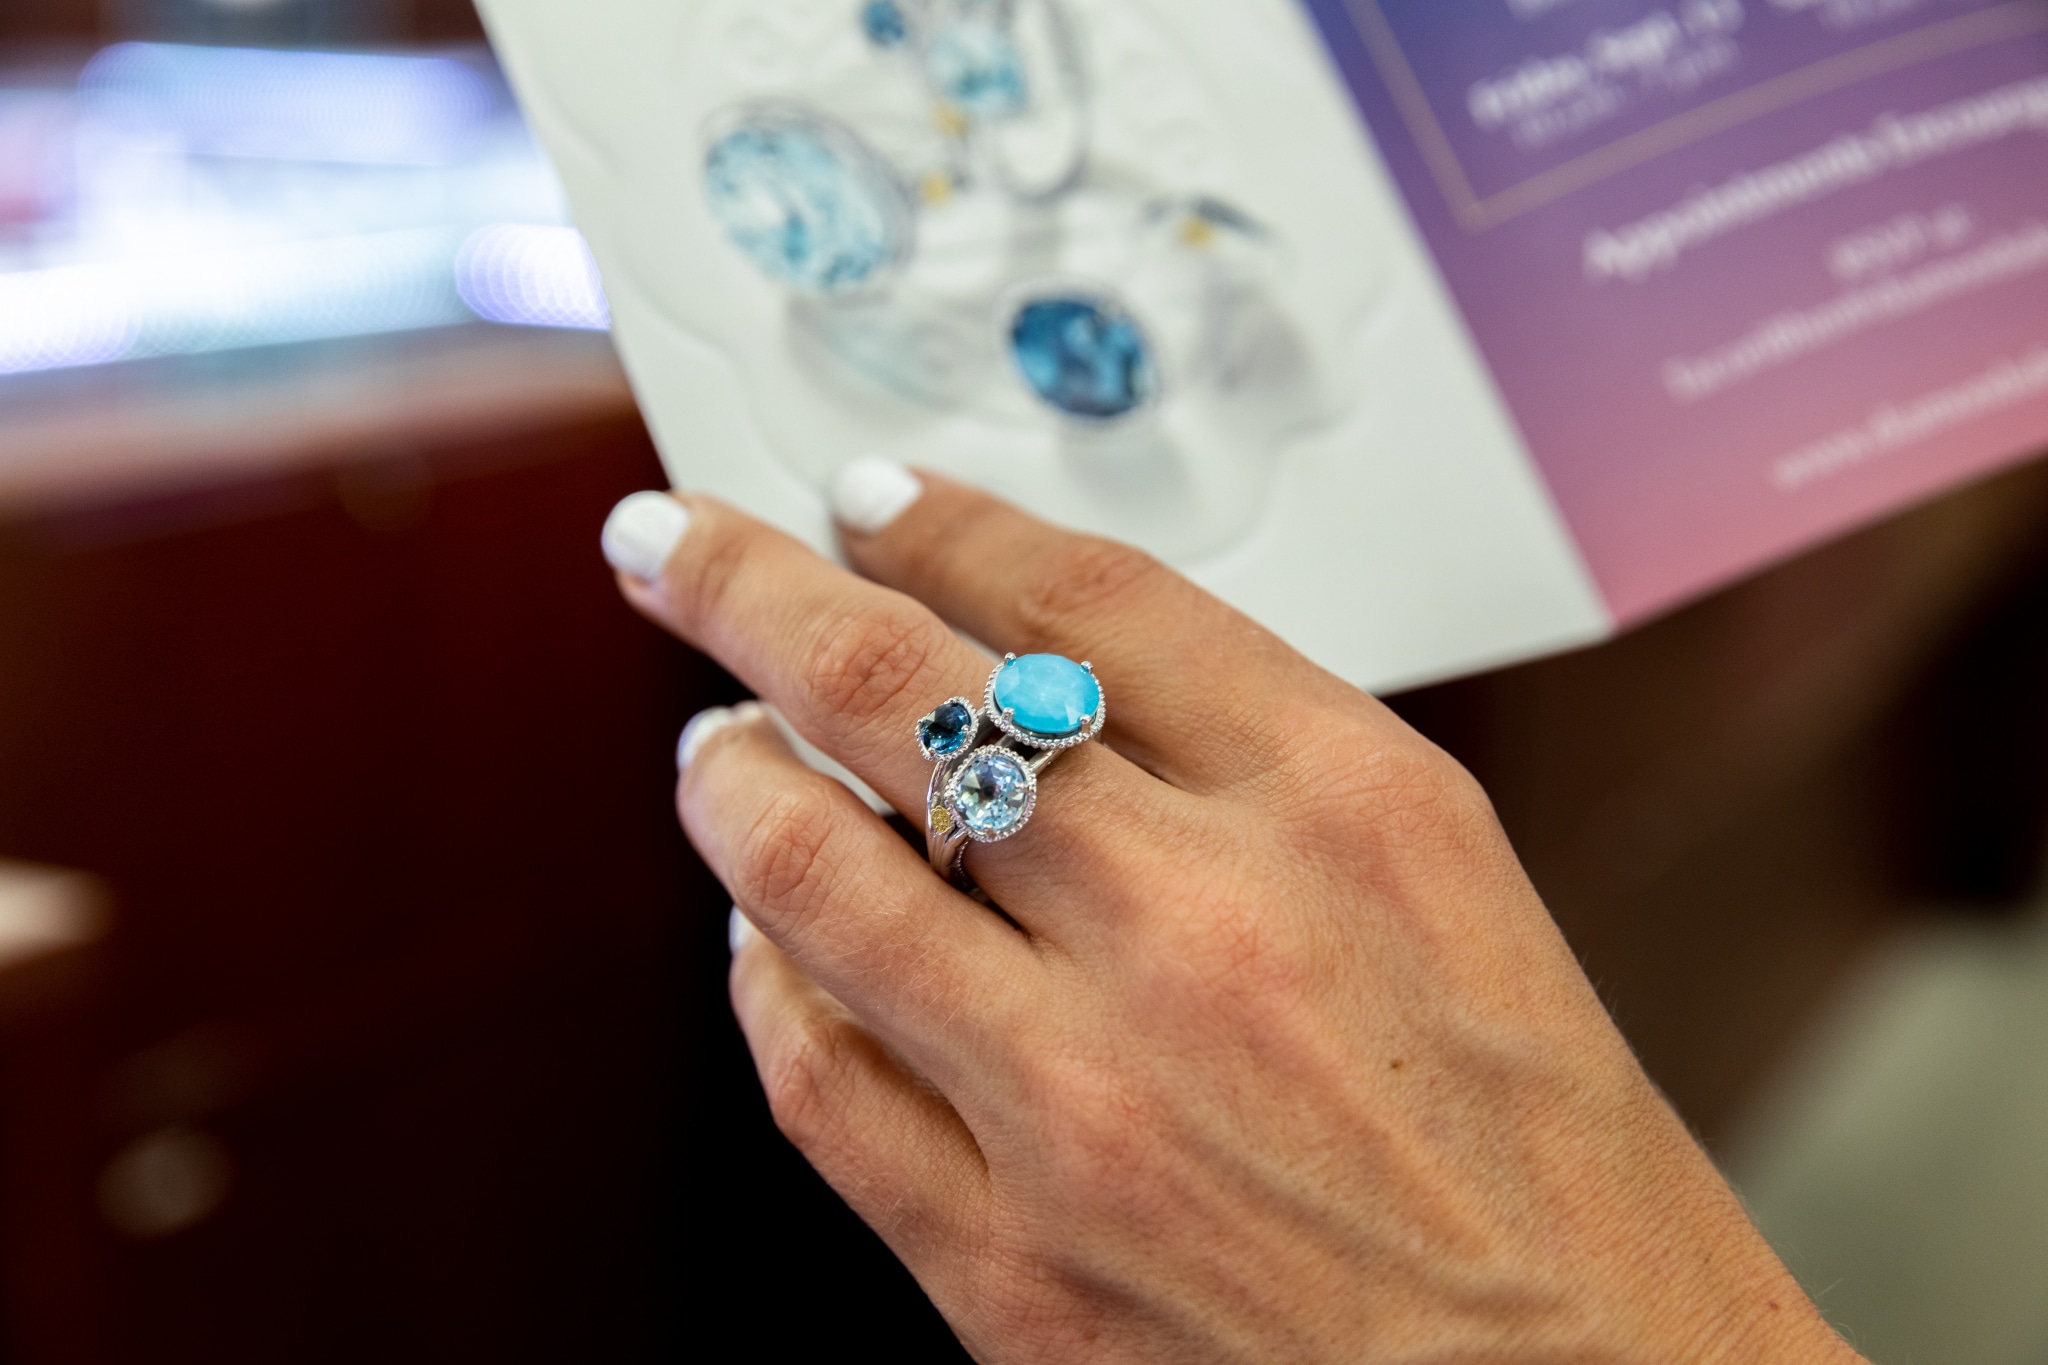 image 1 2 Don’t miss Tacori at Diamonds Direct in Birmingham Sept. 13-14. Free gifts + 0% APR for 5 years!